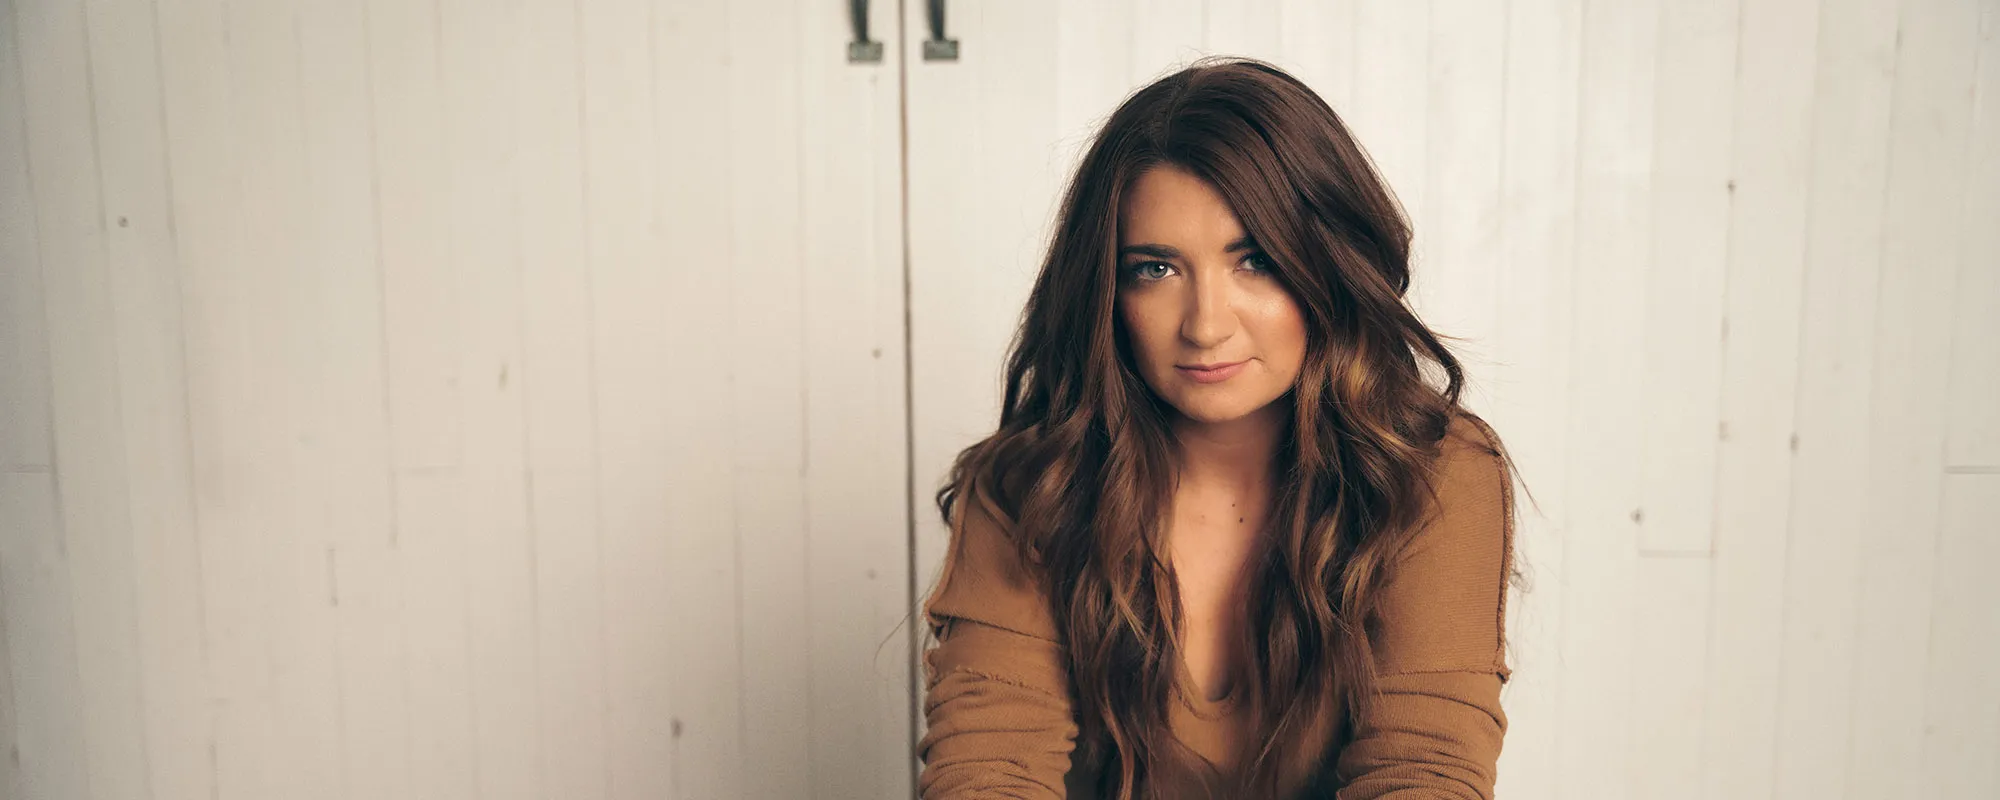 Tenille Townes Talks Recording With Bryan Adams and Writing with Vince Gill